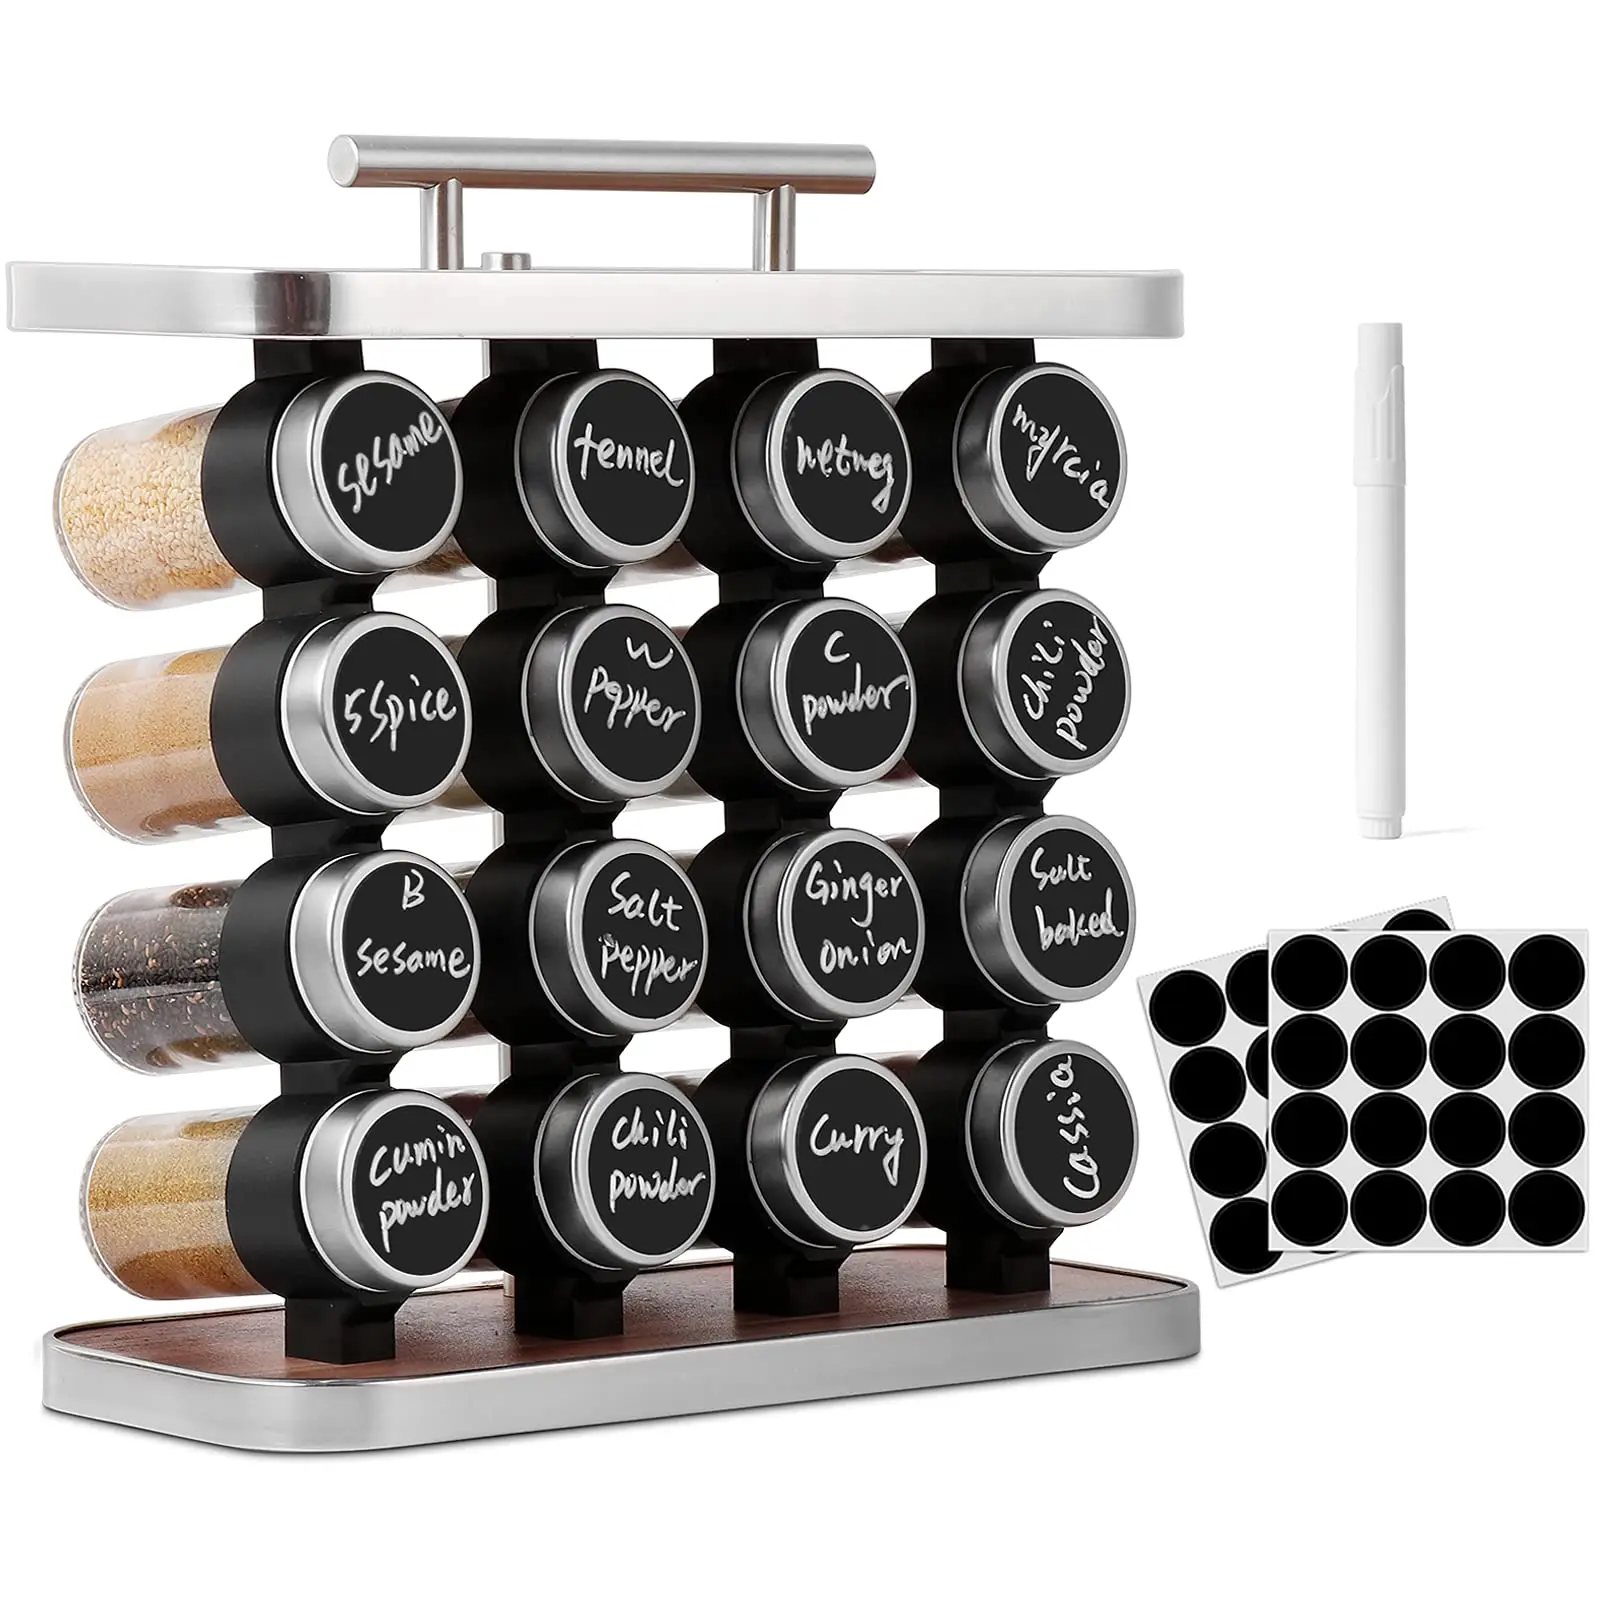 Spice Rack Organizer with Spice Jars Included Labels Chalk Marker for Countertop with Handle Seasoning Rack for Kitchen Cabinet